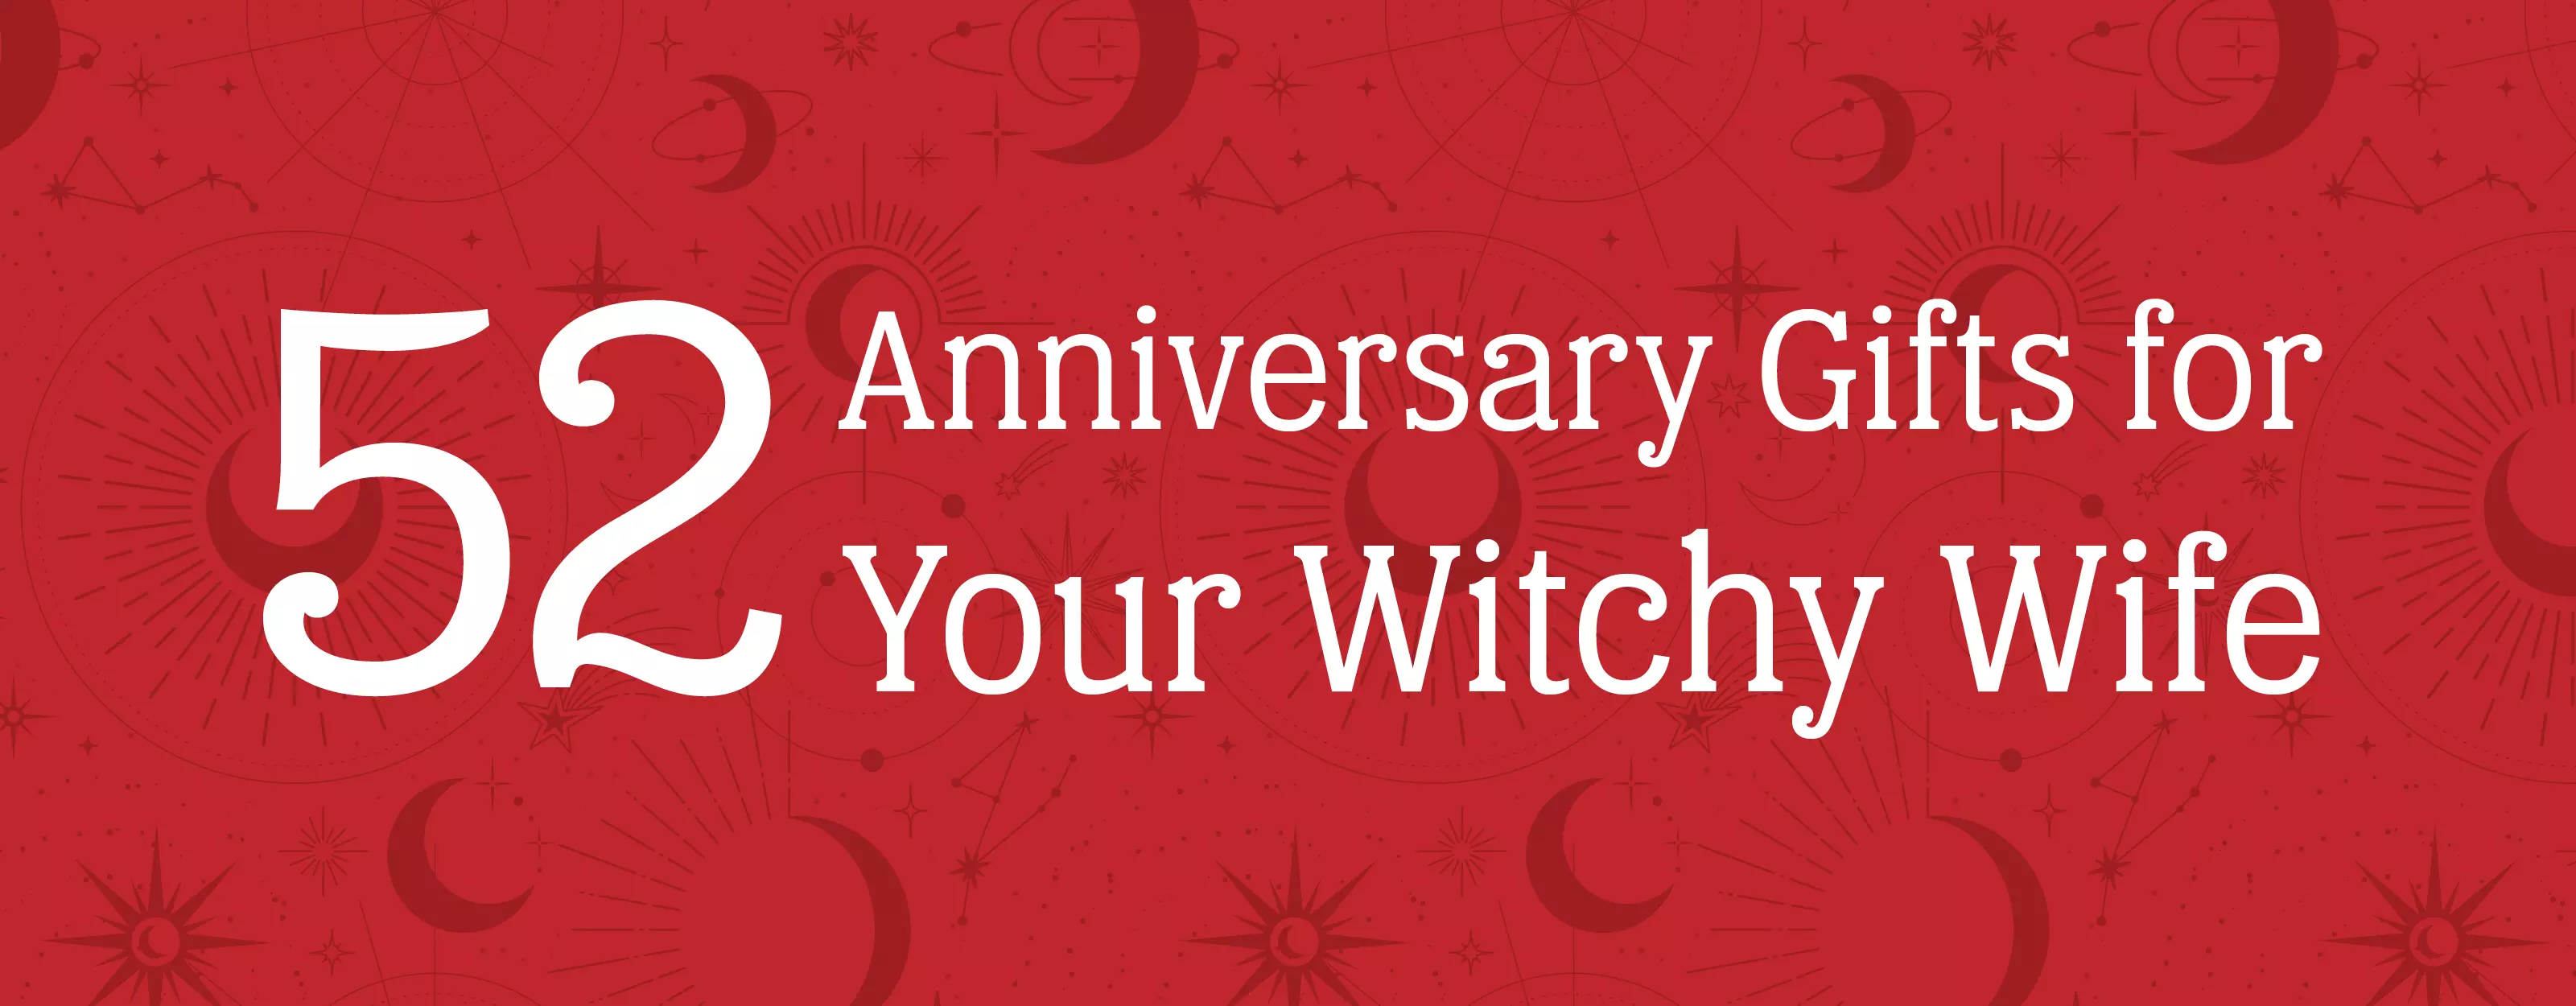 Moon and star pattern on a red background with a white text overlay that reads "52 Anniversary Gifts for Your Witchy Wife"